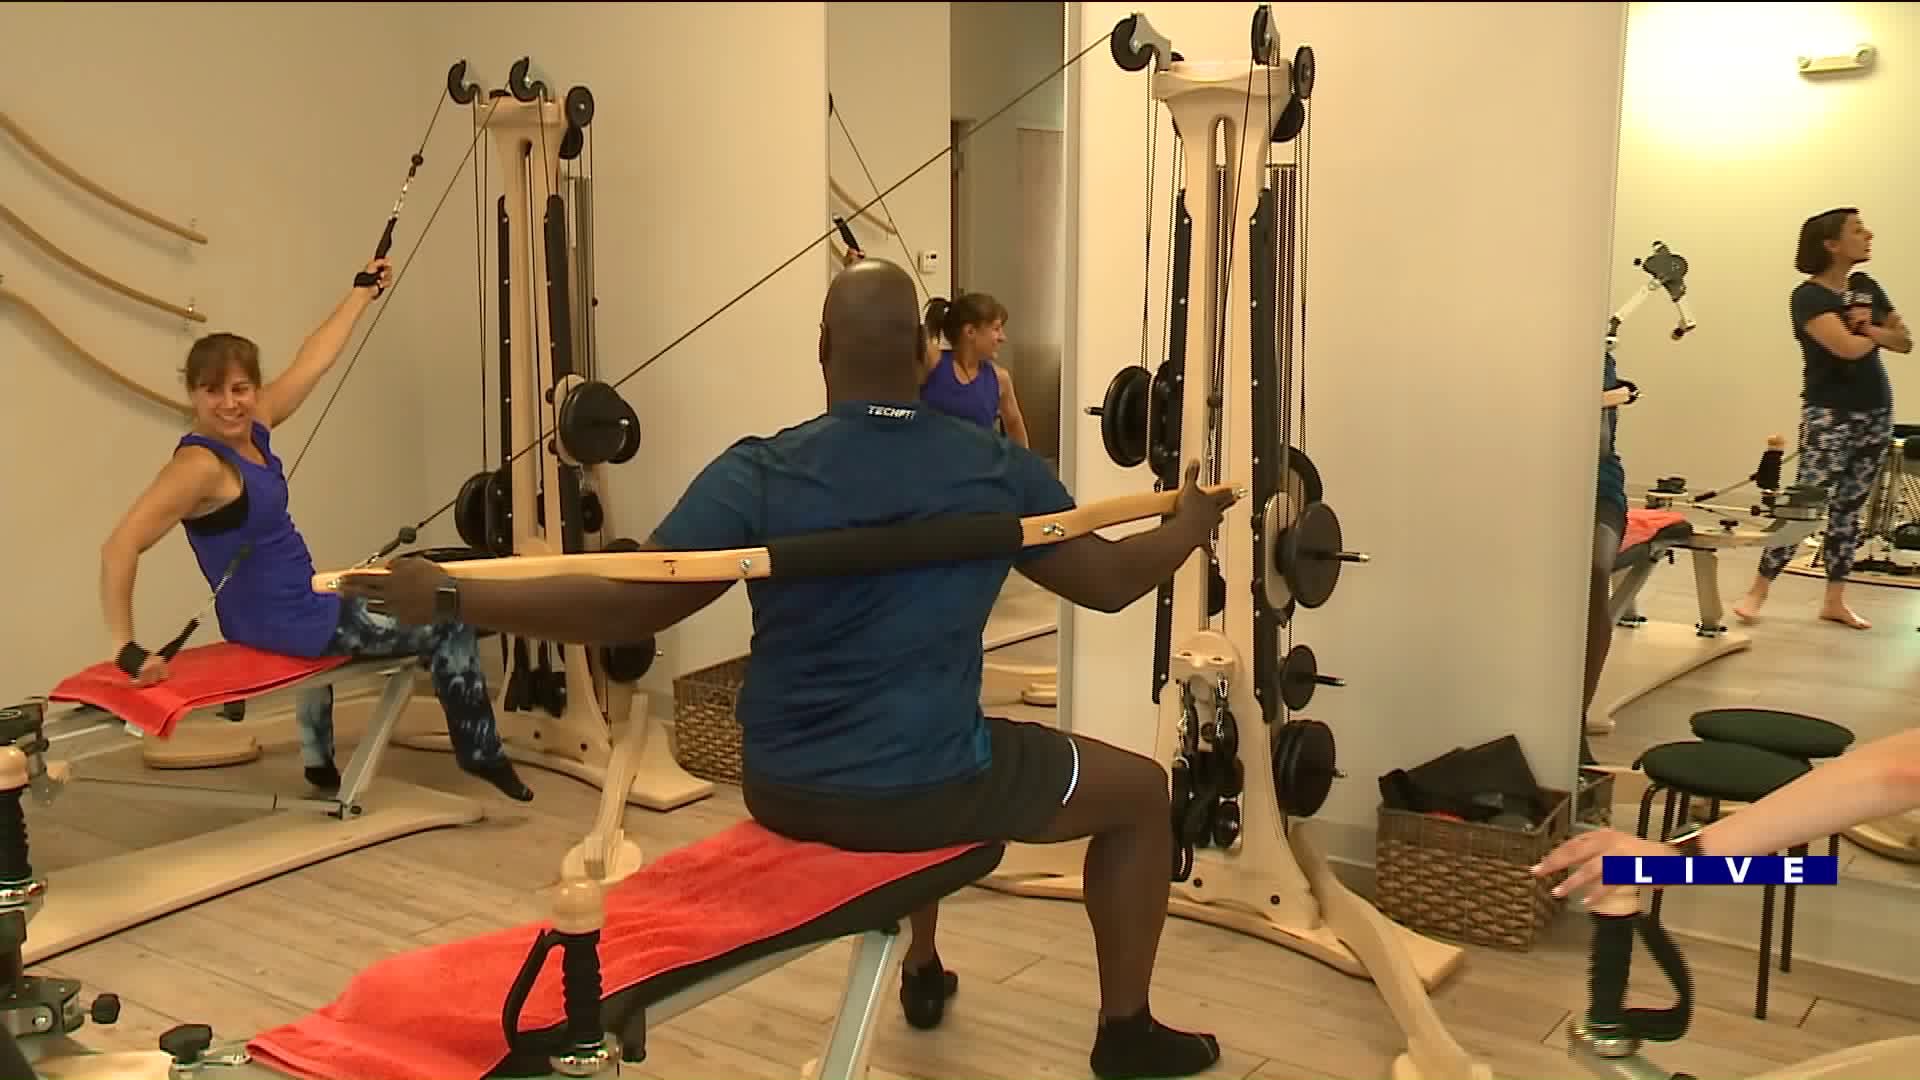 Around Town checks out Gyrotonic Exercise at Spyrl Chicago